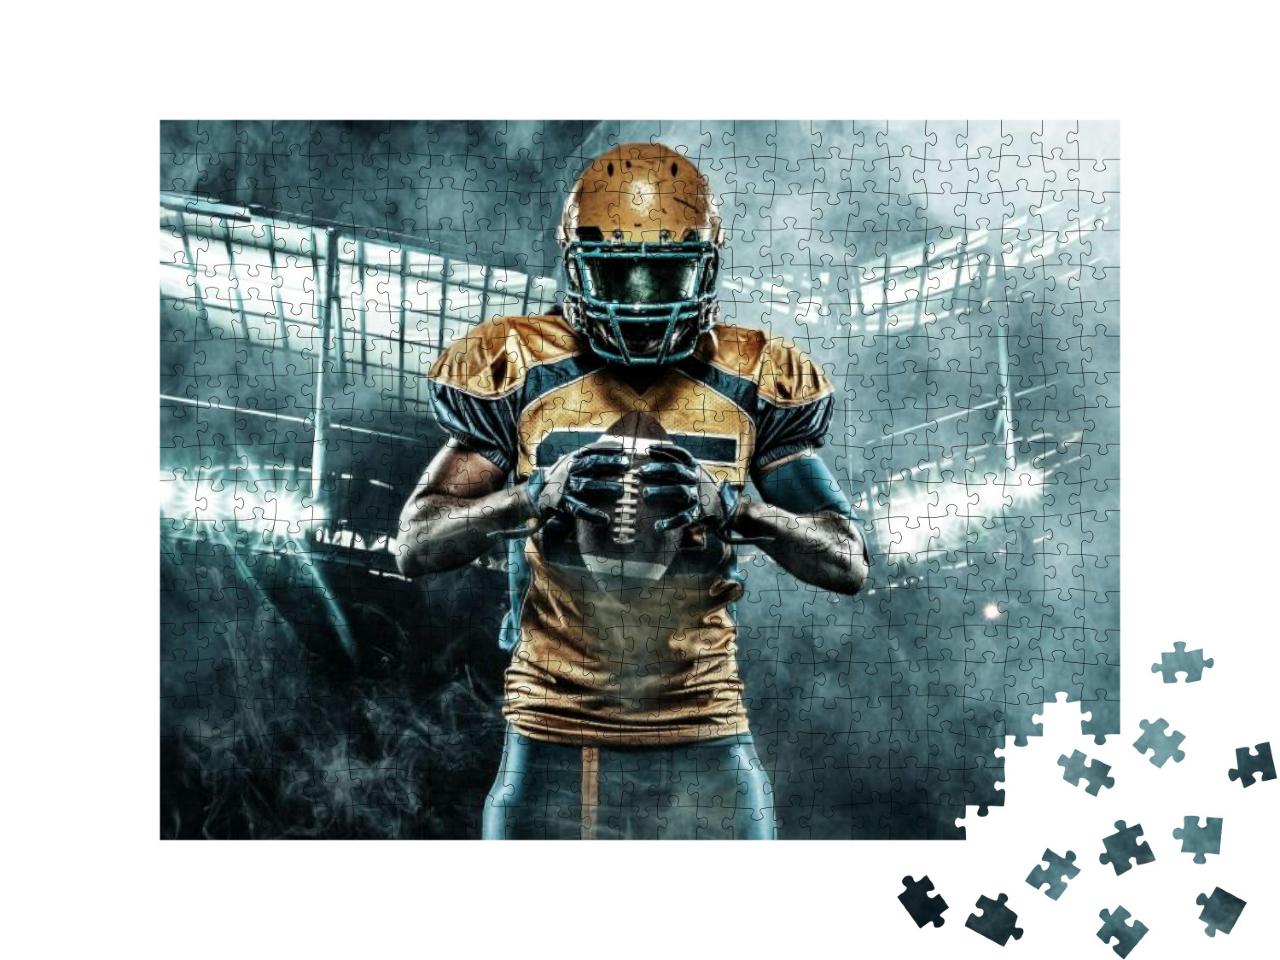 Puzzle 500 Teile „American-Football-Spieler“